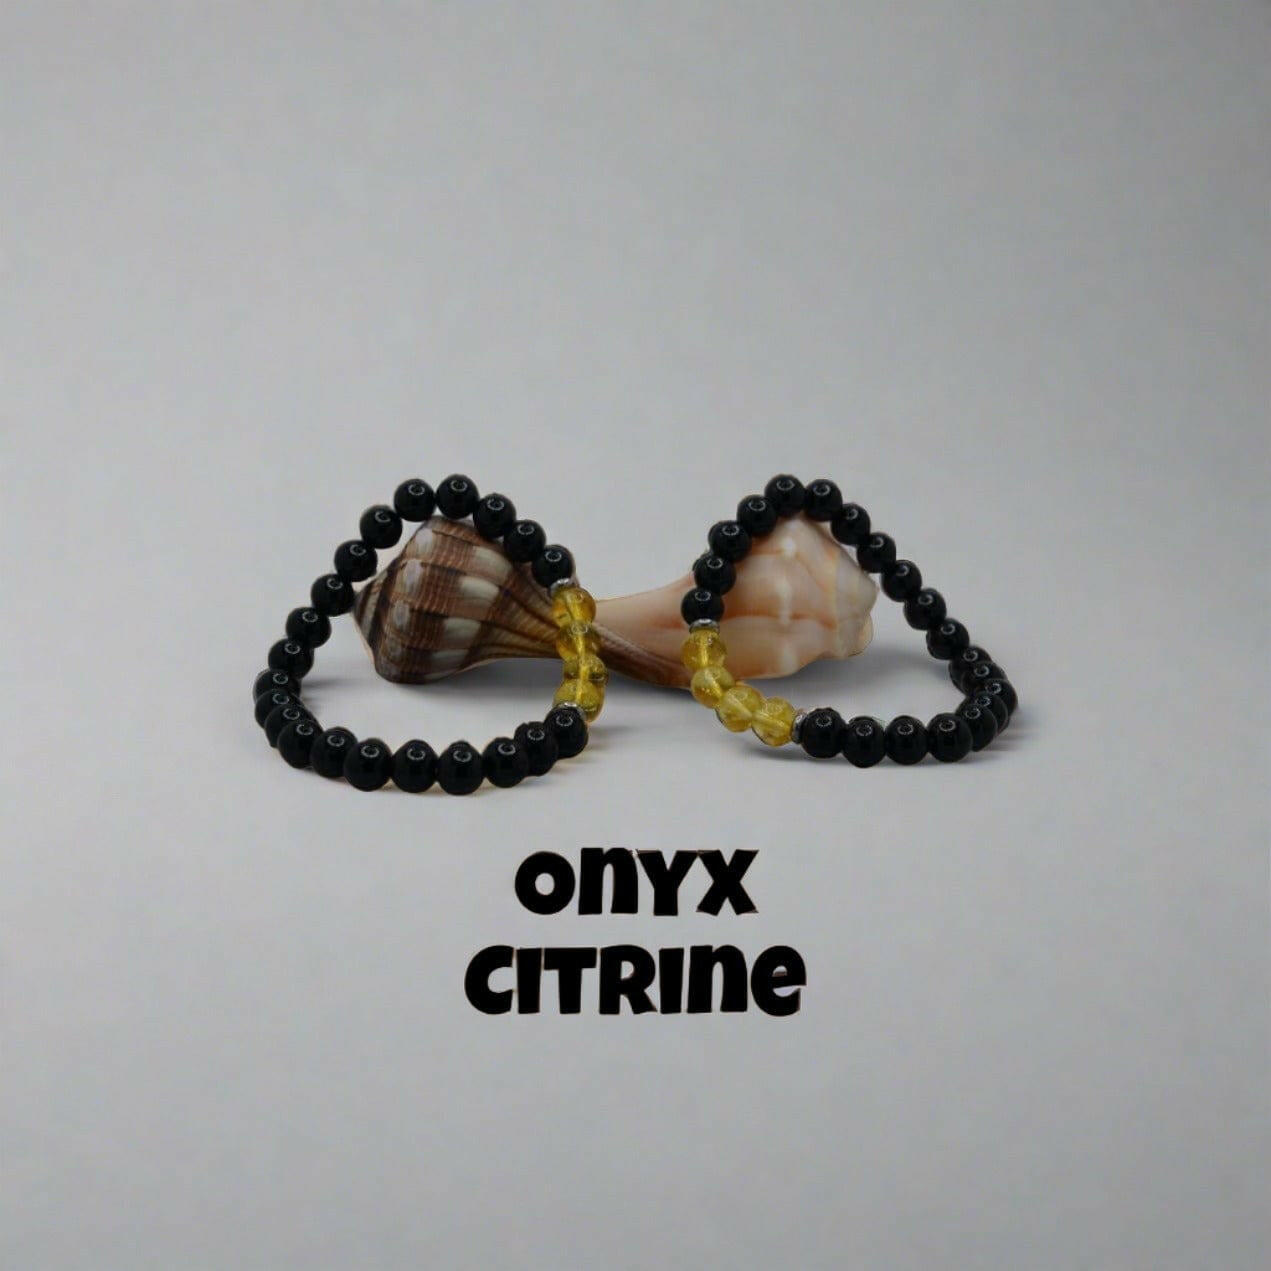 Shiny Black Onyx gemstone for elegant jewelry designs, Citrine for bright and vibrant accessories.